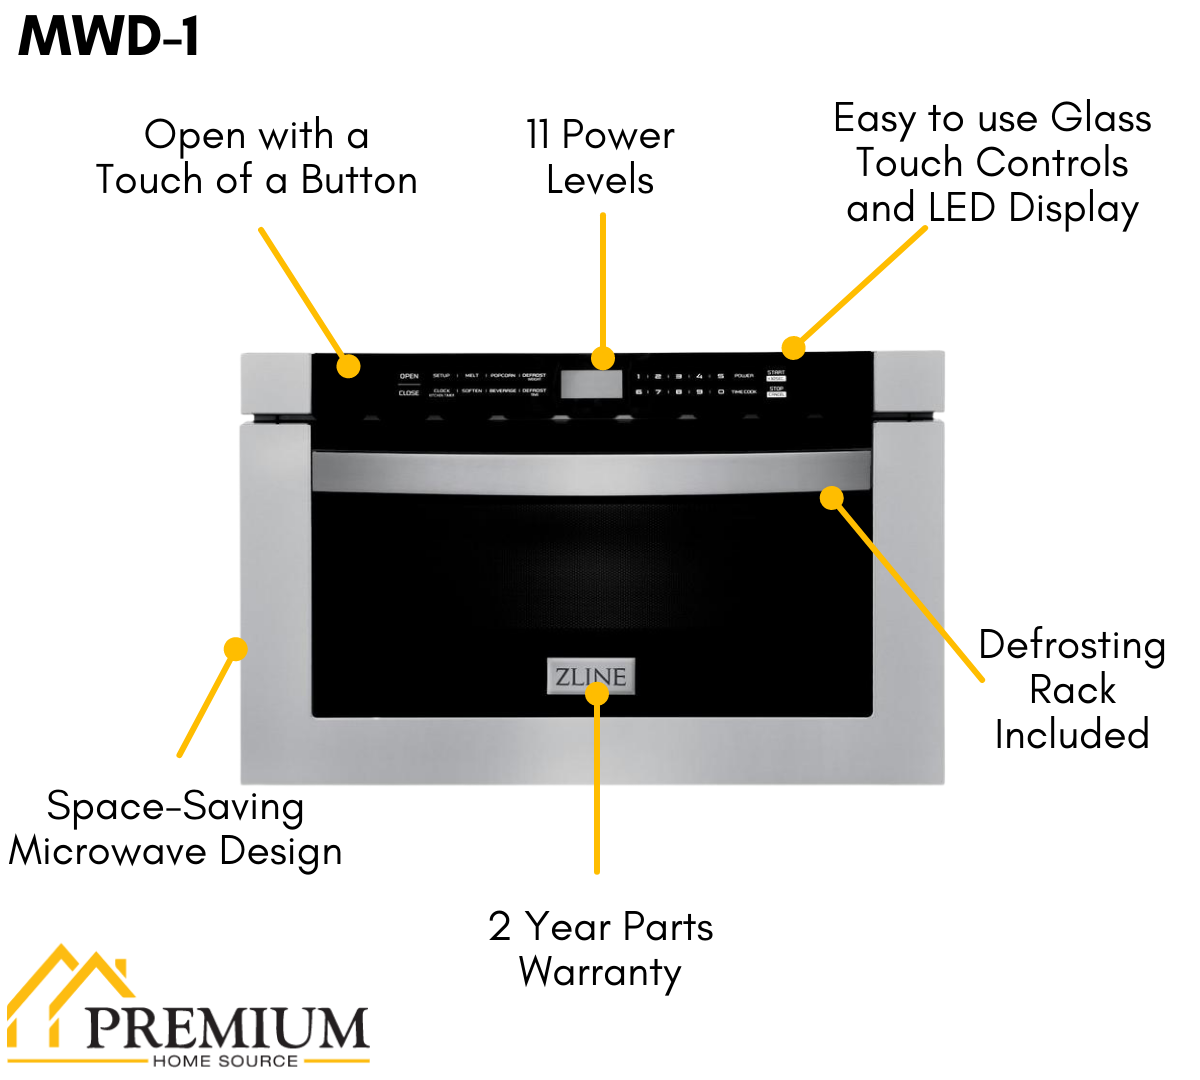 ZLINE 30" Kitchen Package with Stainless Steel Gas Range, Range Hood, Microwave Drawer and Tall Tub Dishwasher